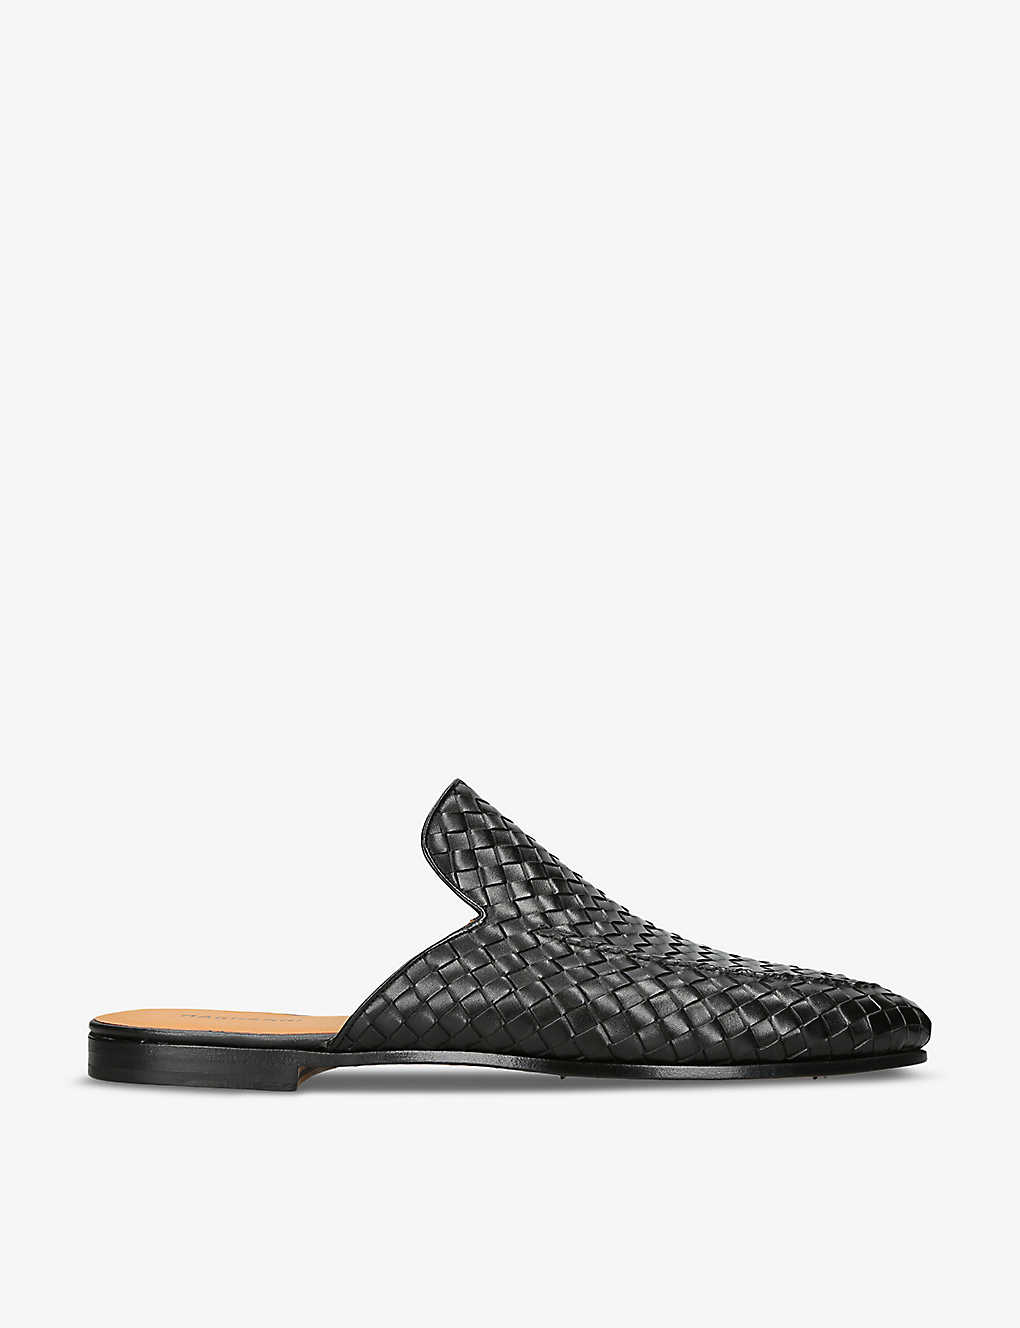 MAGNANNI WOVEN LEATHER SLIP-ON MULES